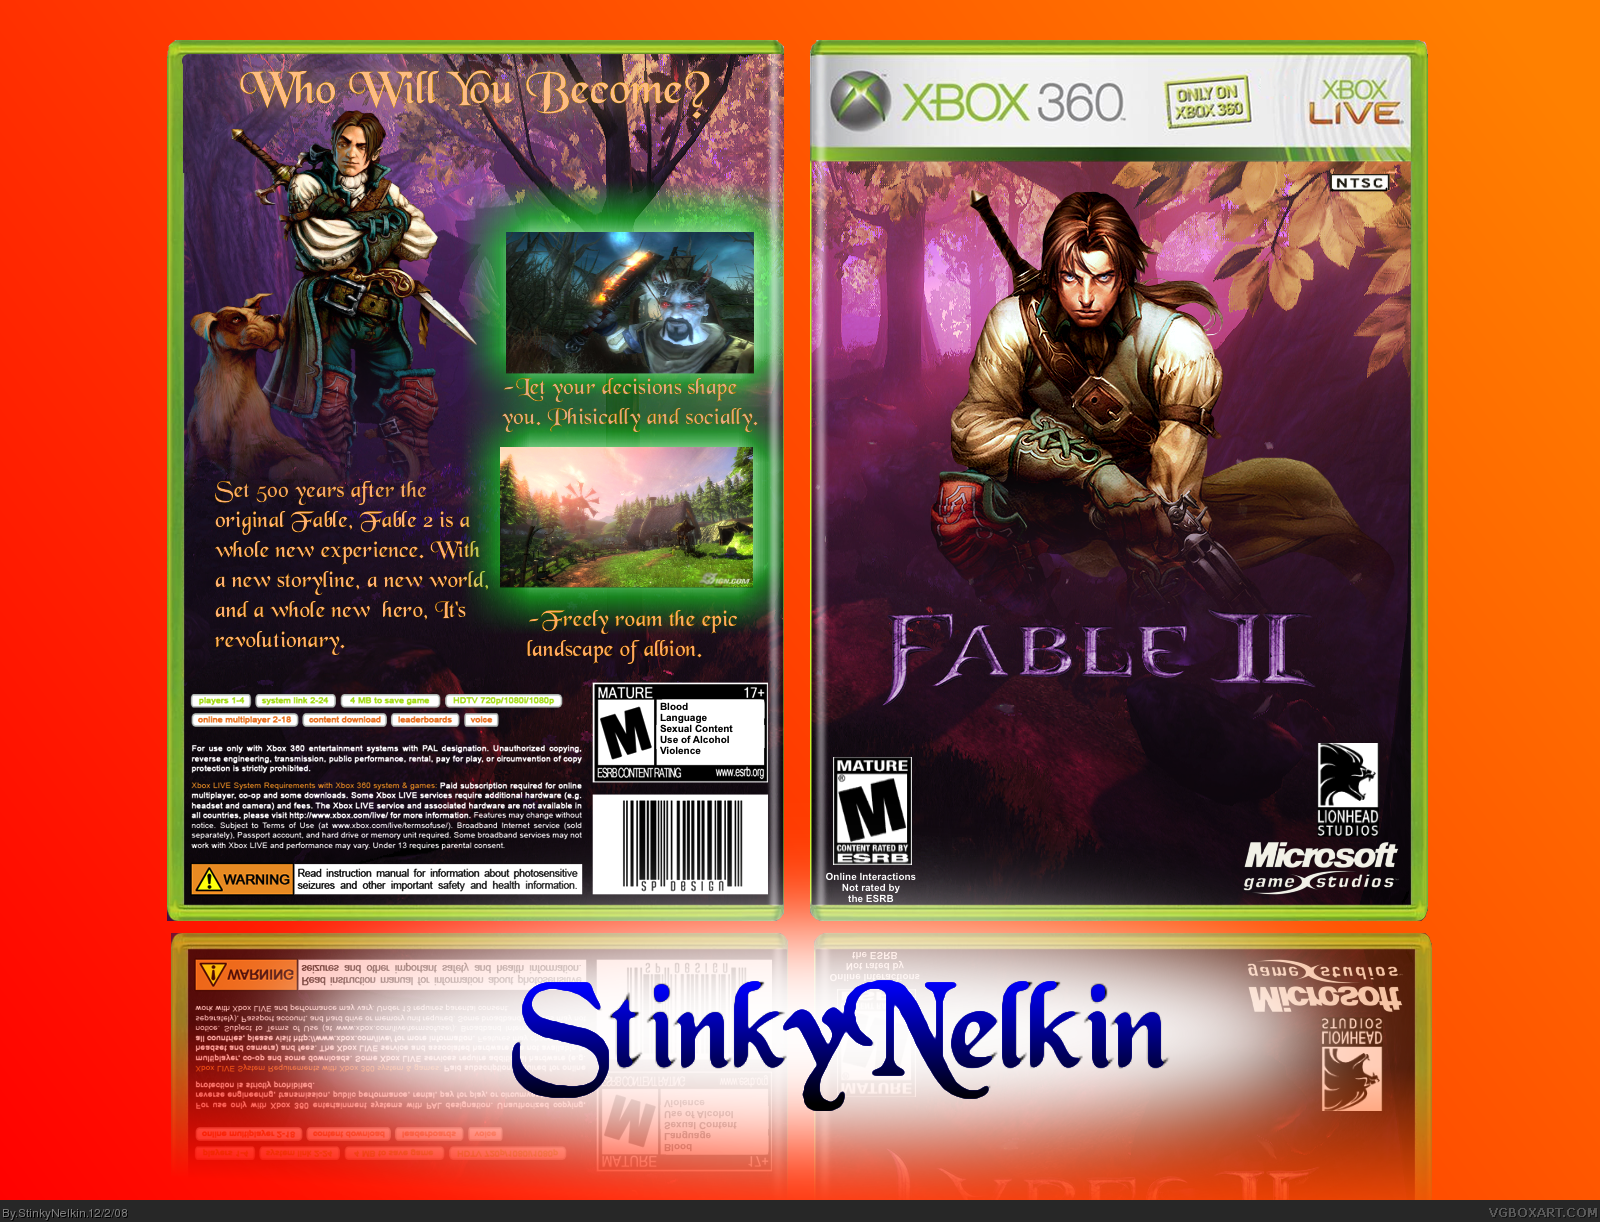 READ] Fable II (Microsoft Xbox 360, 2018) new sealed